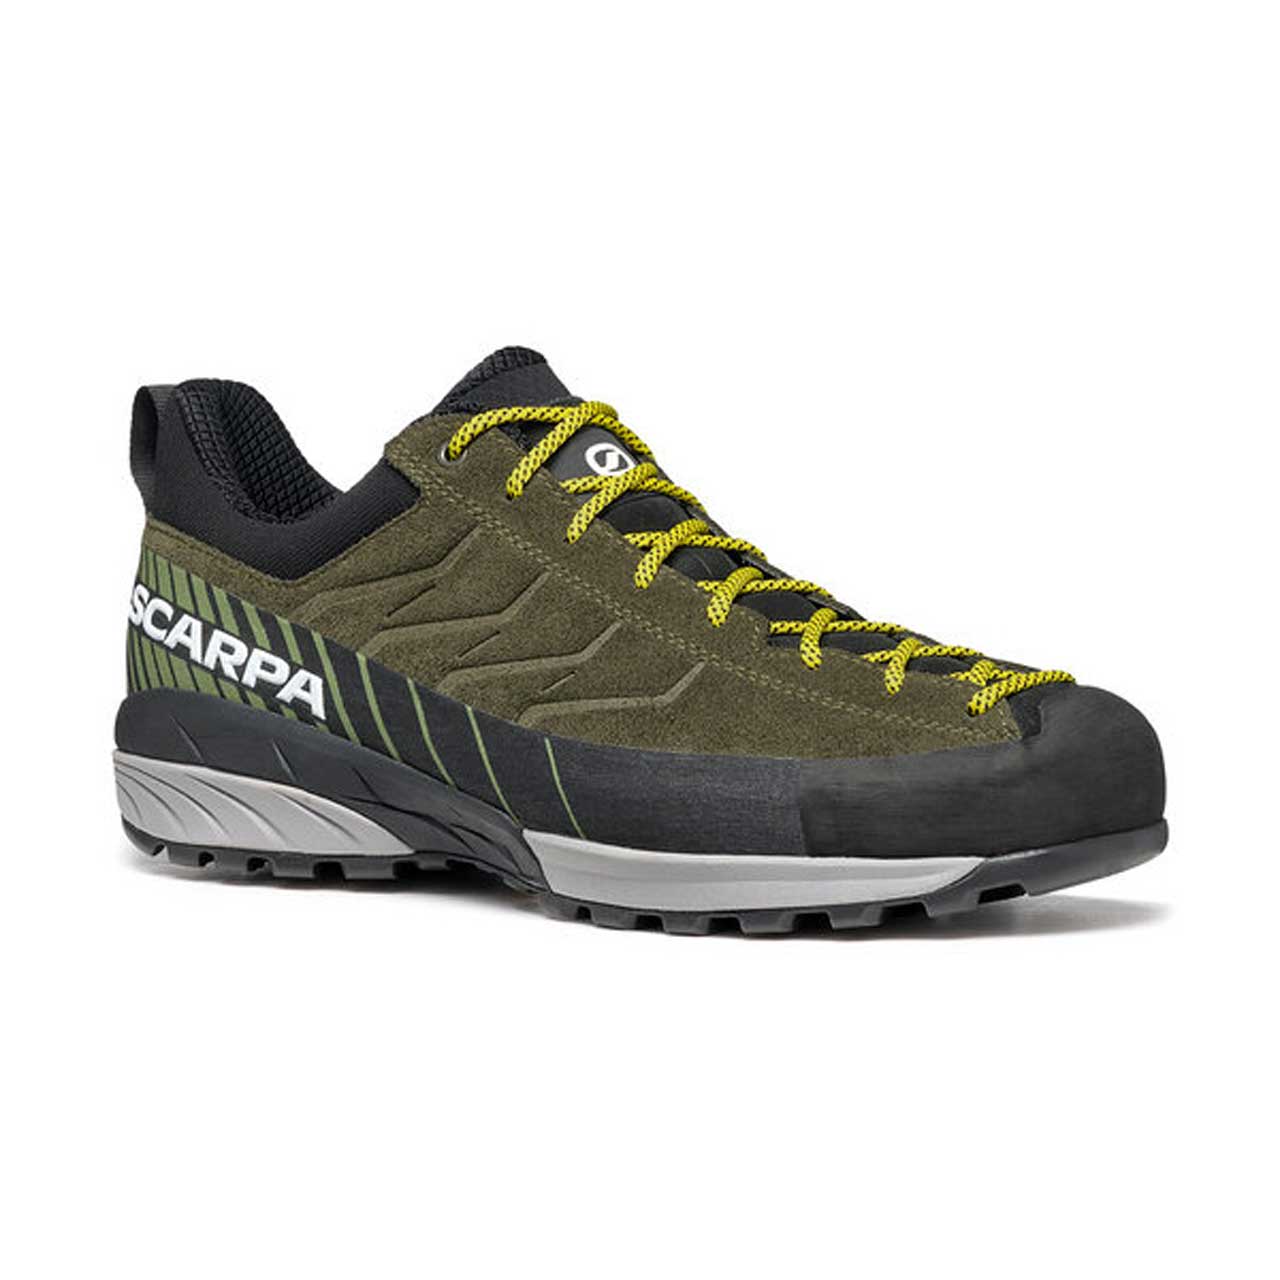 Scarpa Mescalito - Thyme Green/Forest, 45